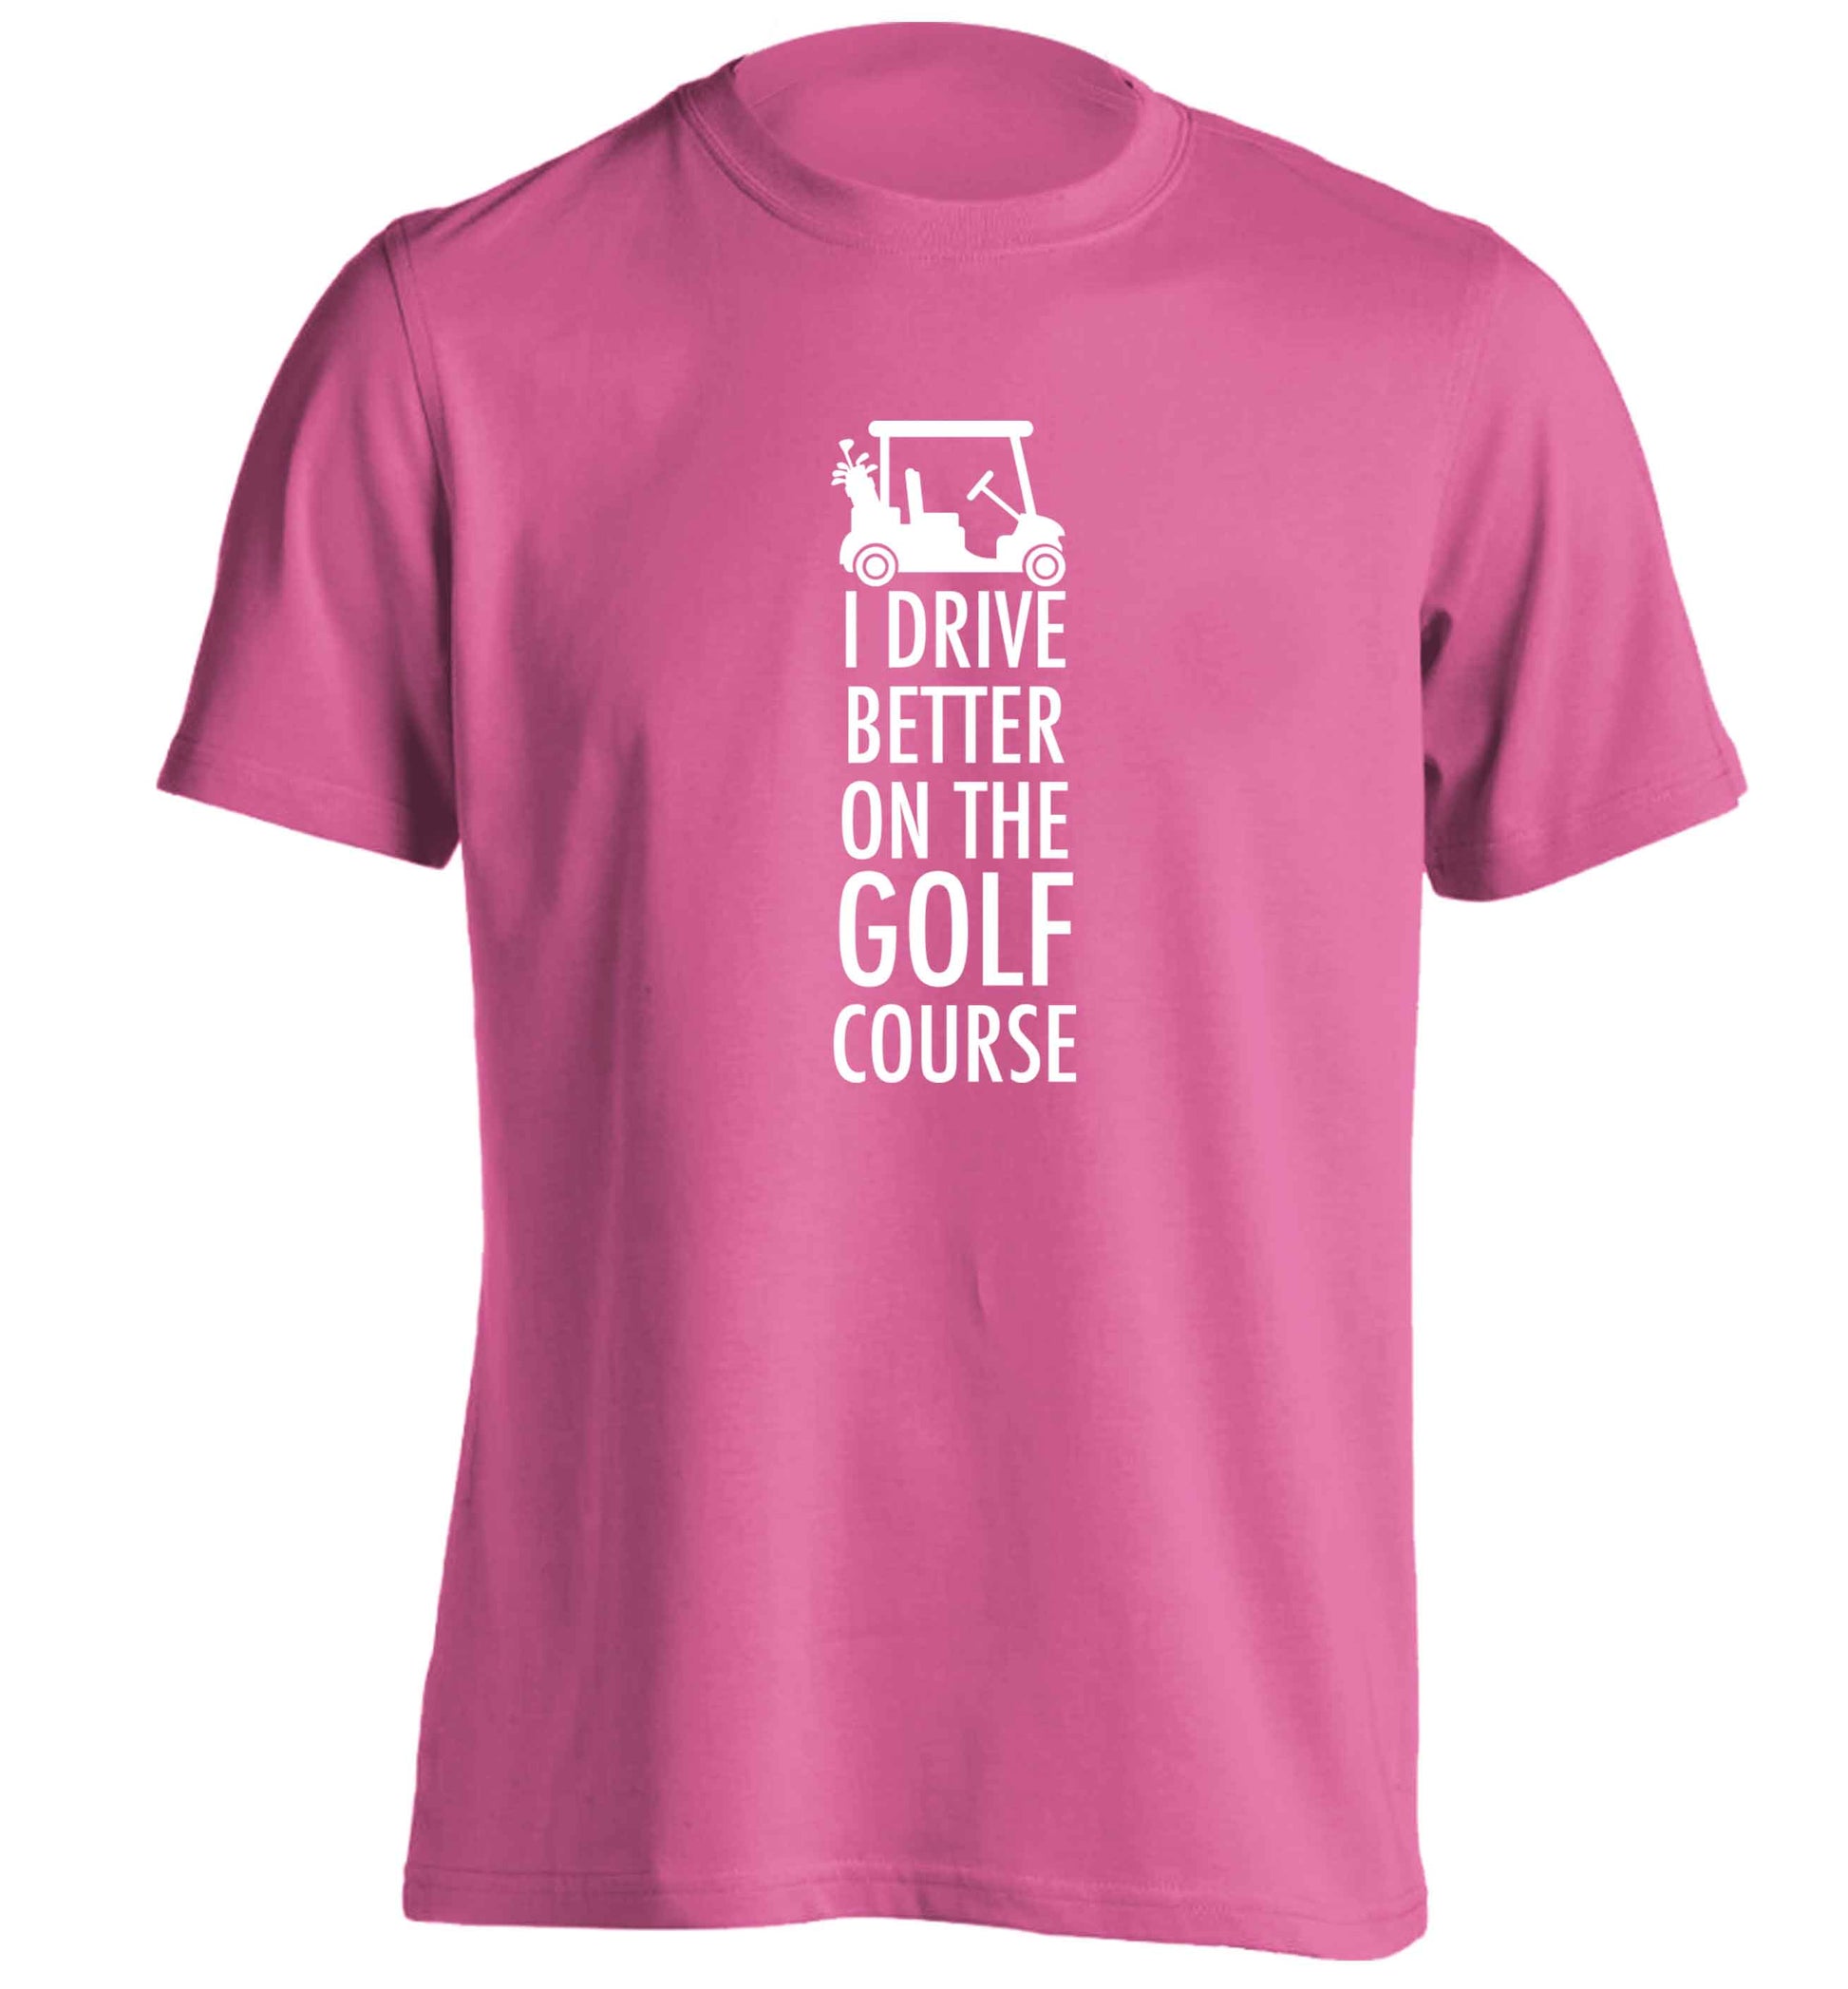 I drive better on the golf course adults unisex pink Tshirt 2XL